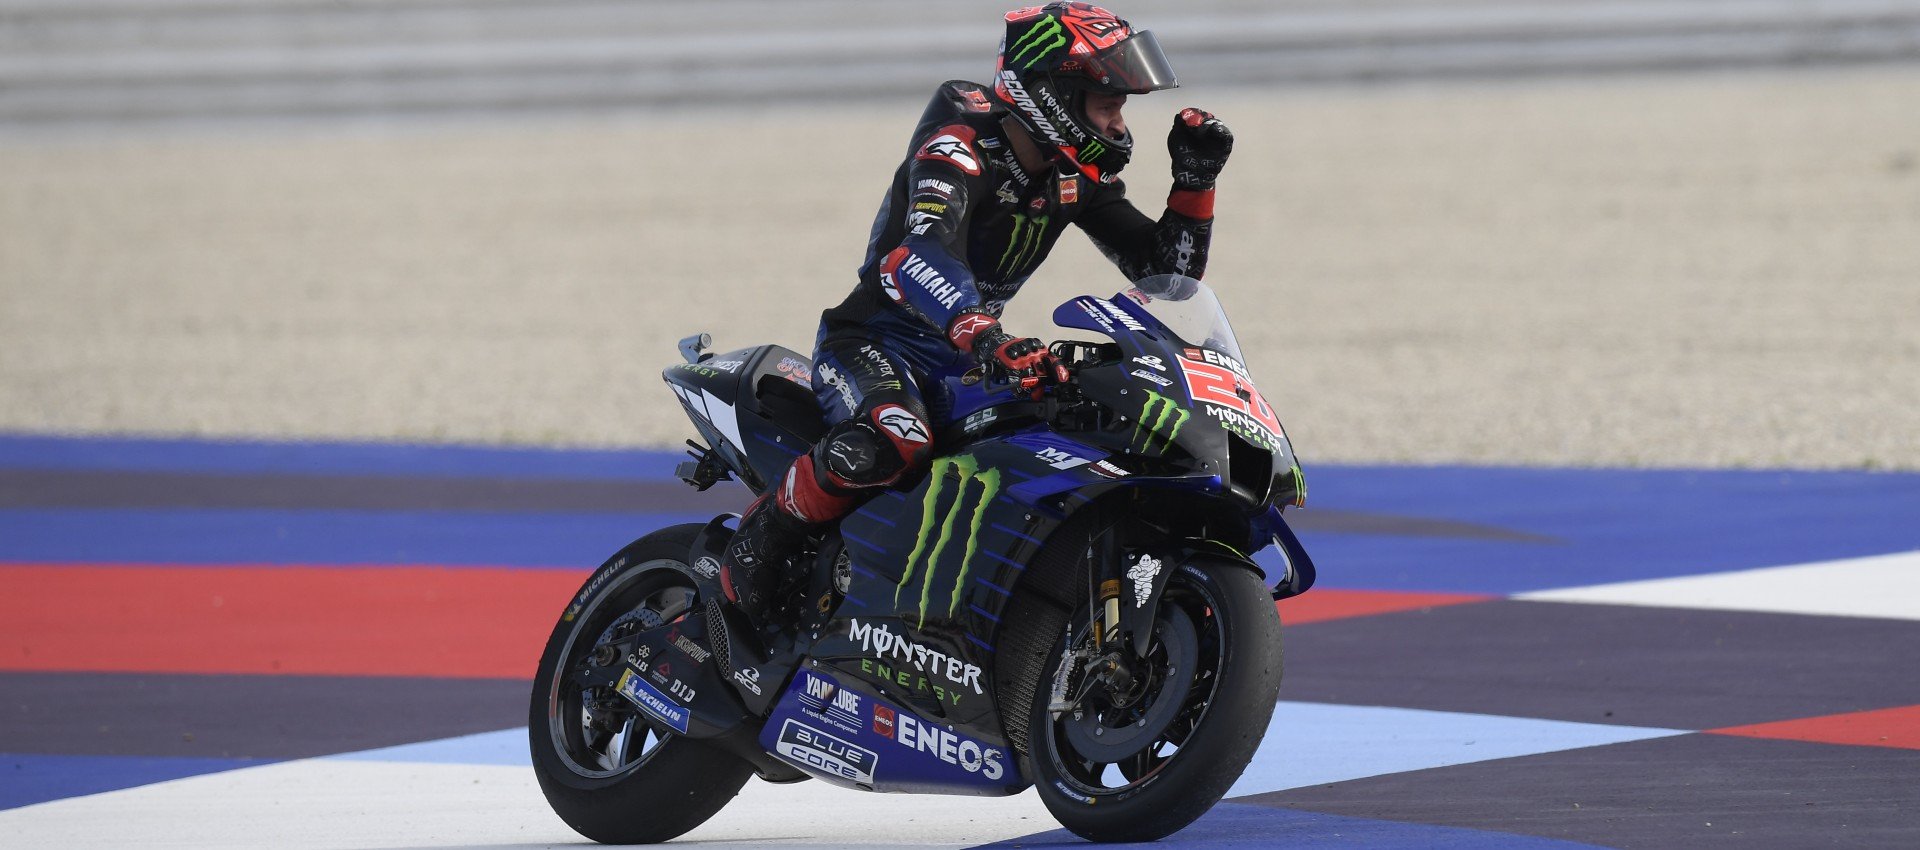 BMC Air Filter is sponsor and official supplier of the Monster Energy Yamaha MotoGP team.